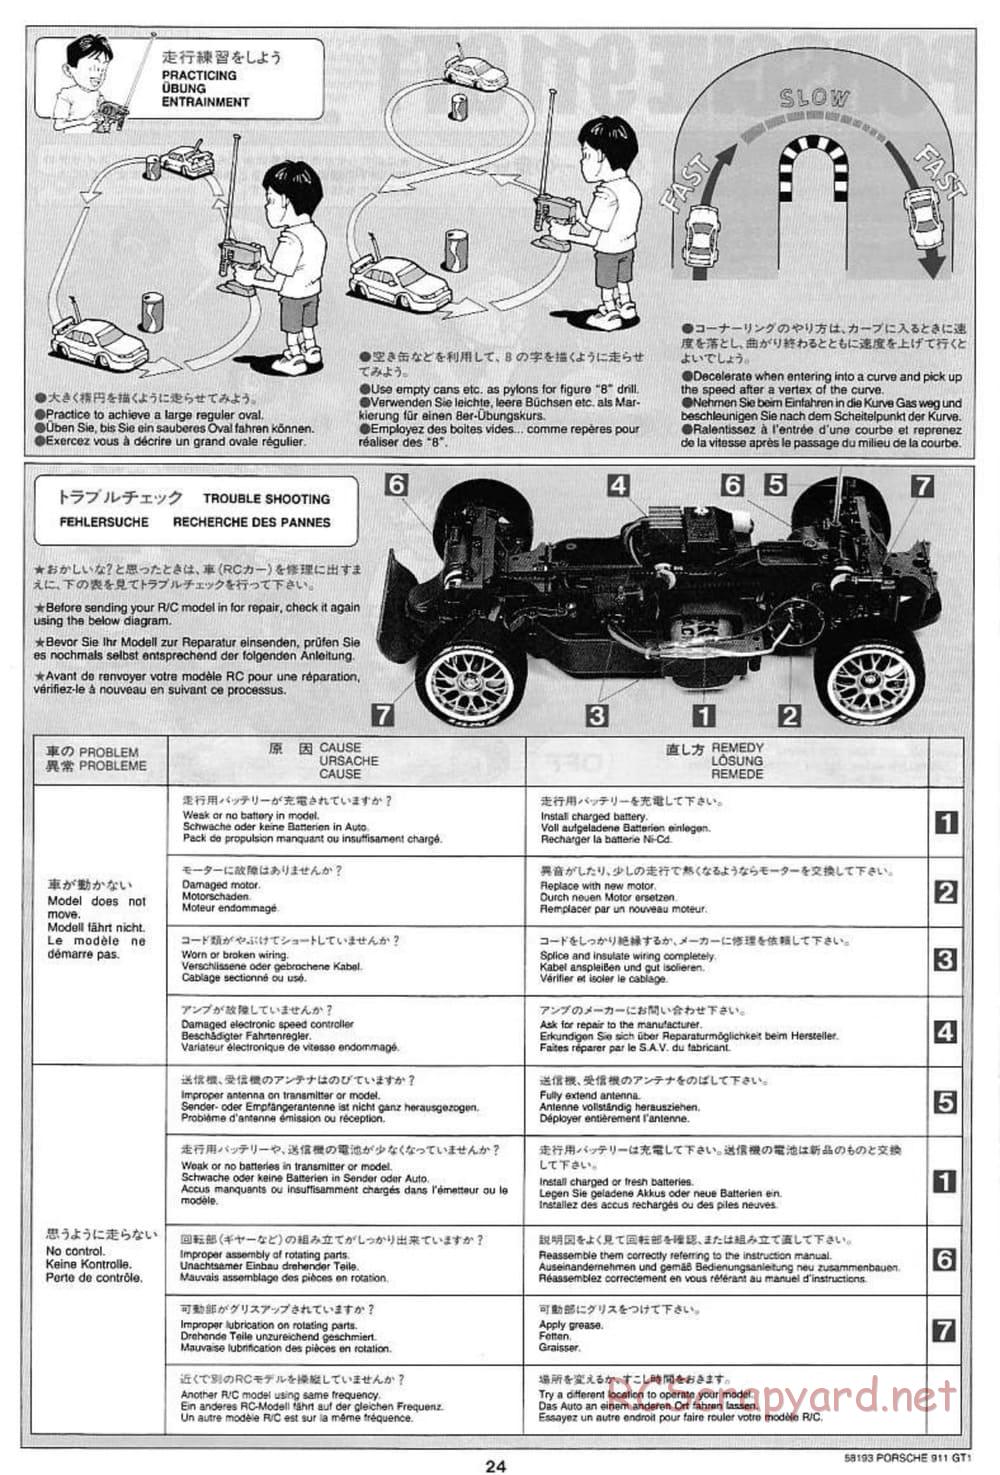 Tamiya - Porsche 911 GT1 - TA-03RS Chassis - Manual - Page 24